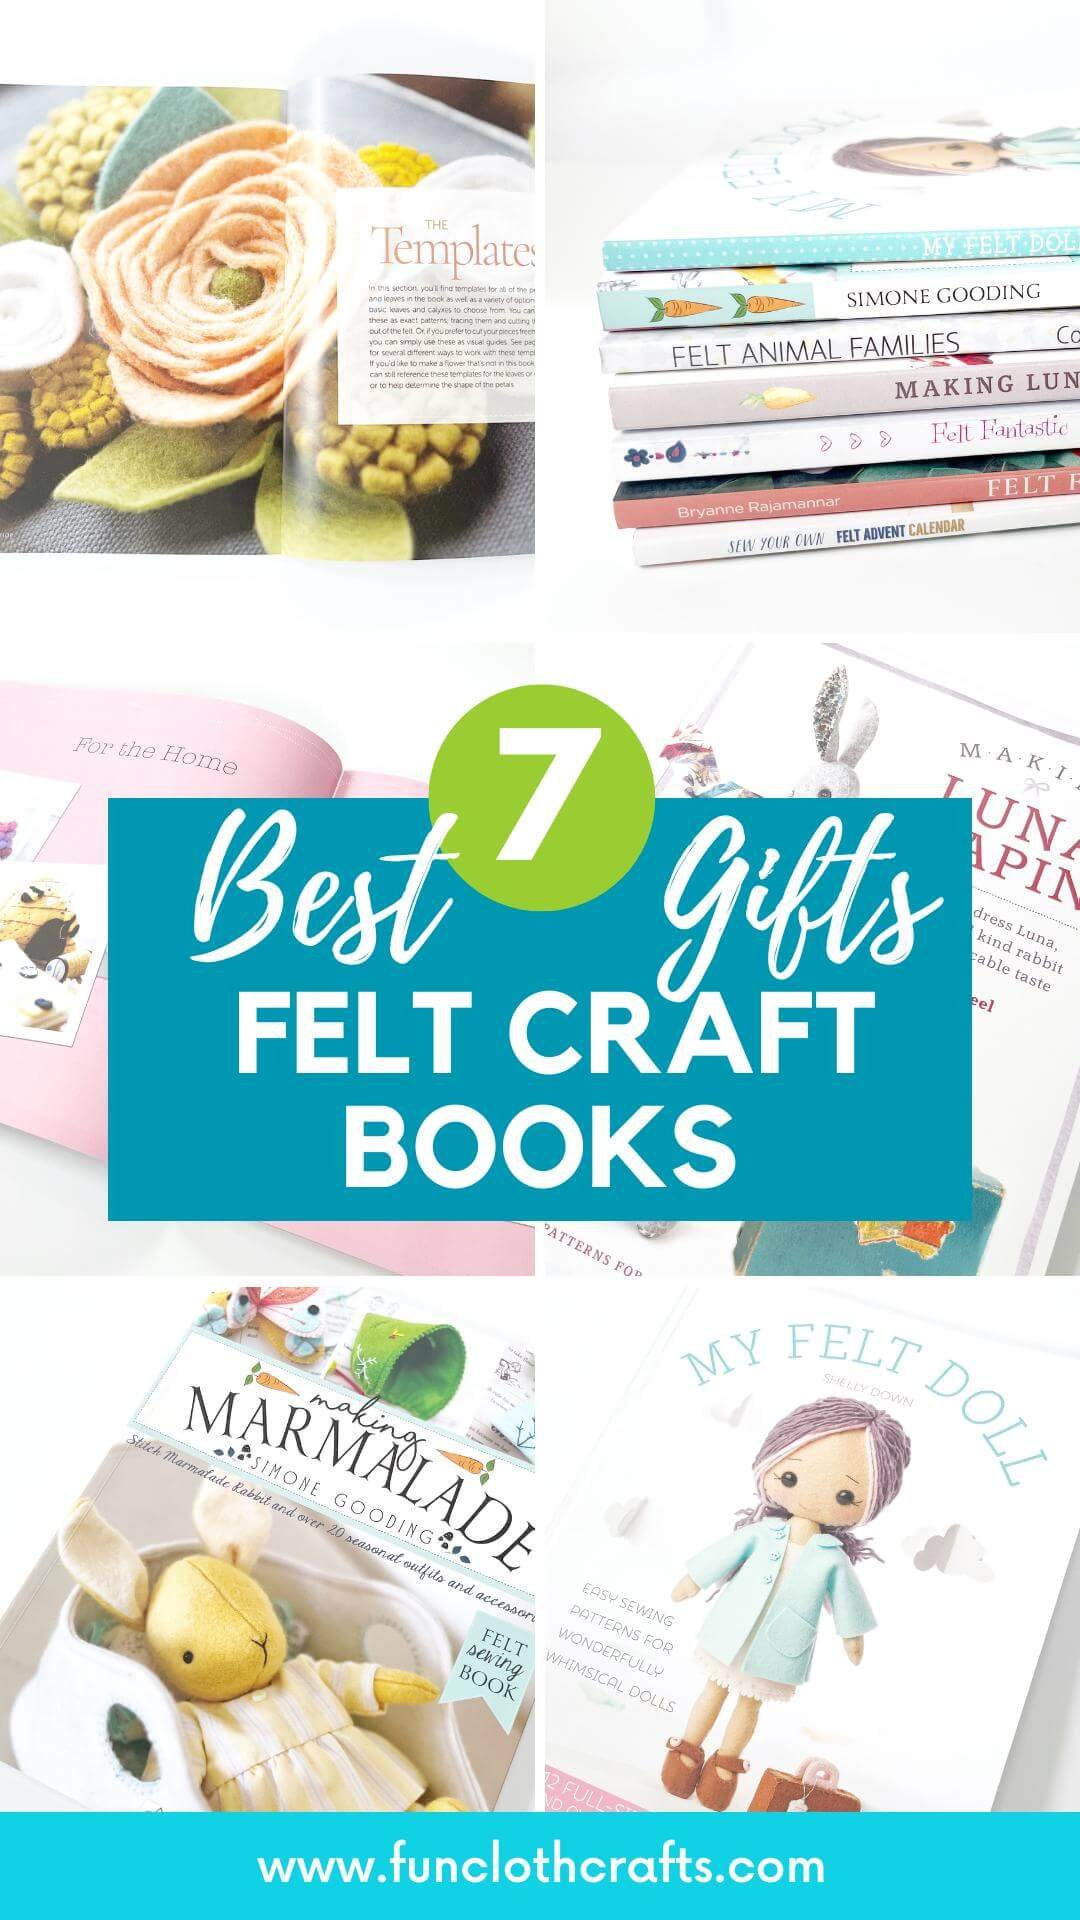 21 DIY Book-Themed Crafts - Crafting Cheerfully